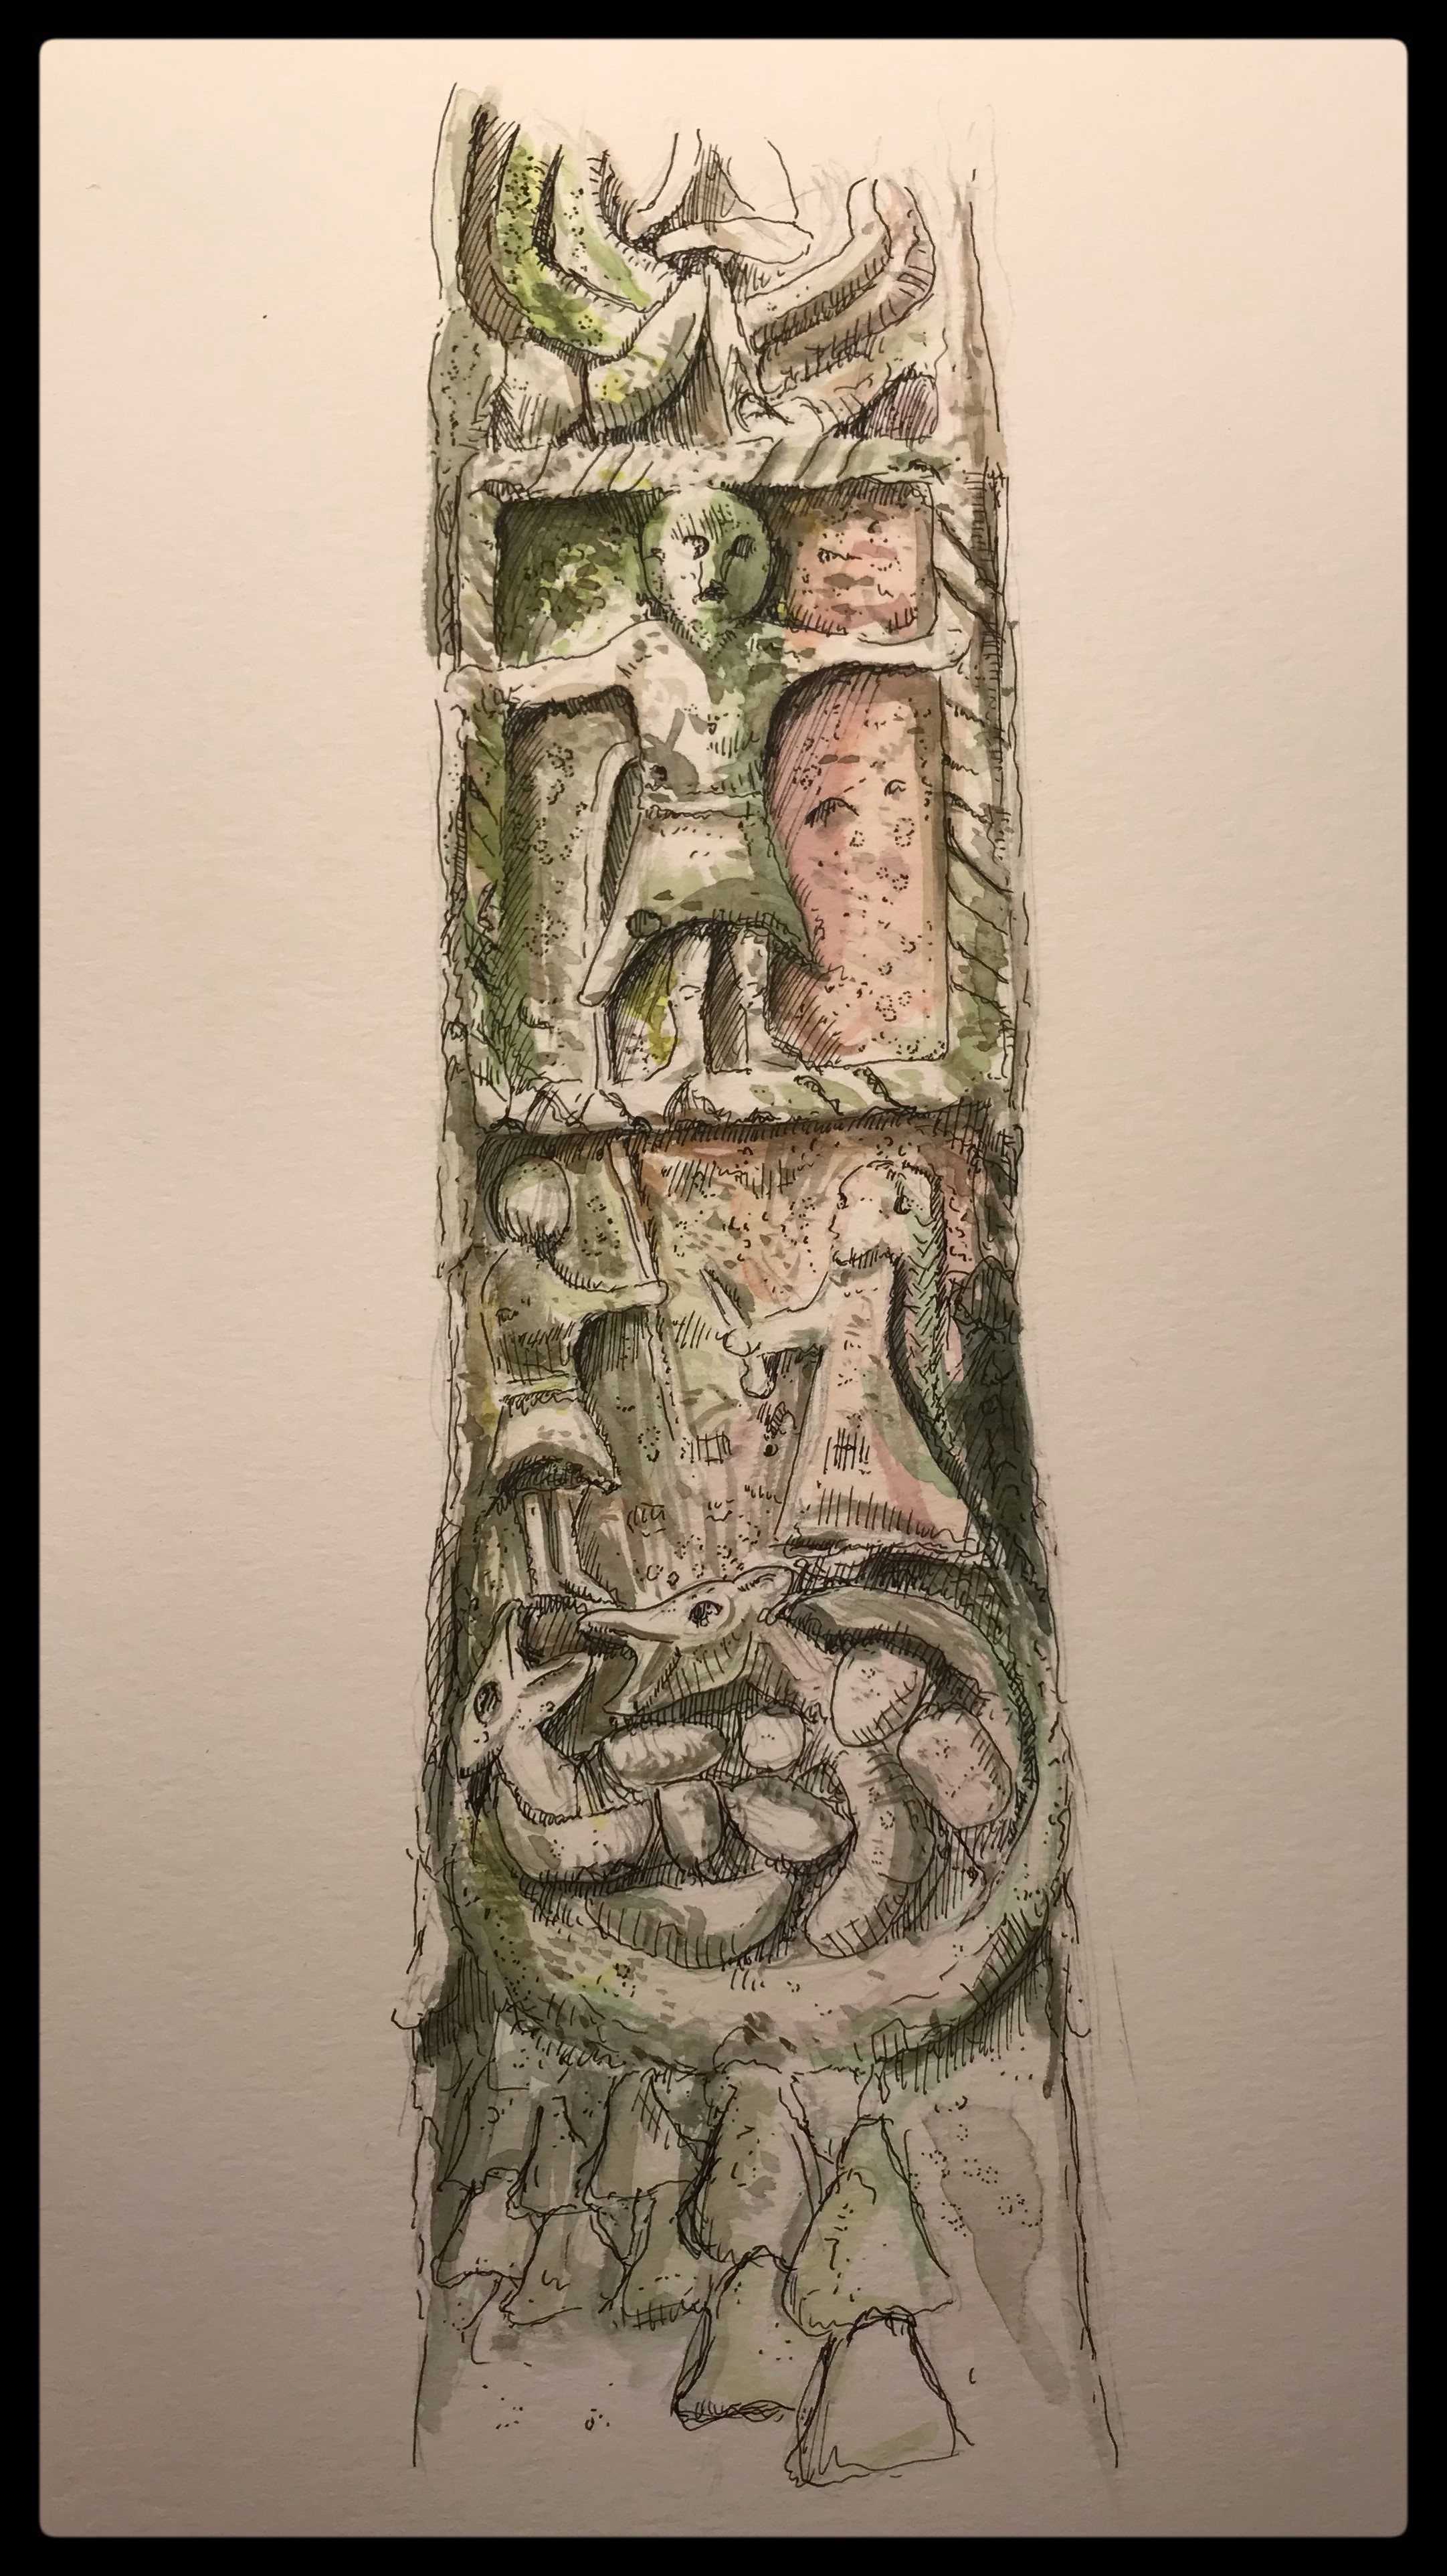 A watercolour painting of a piece of stone with lots of worn iconography with animals and people